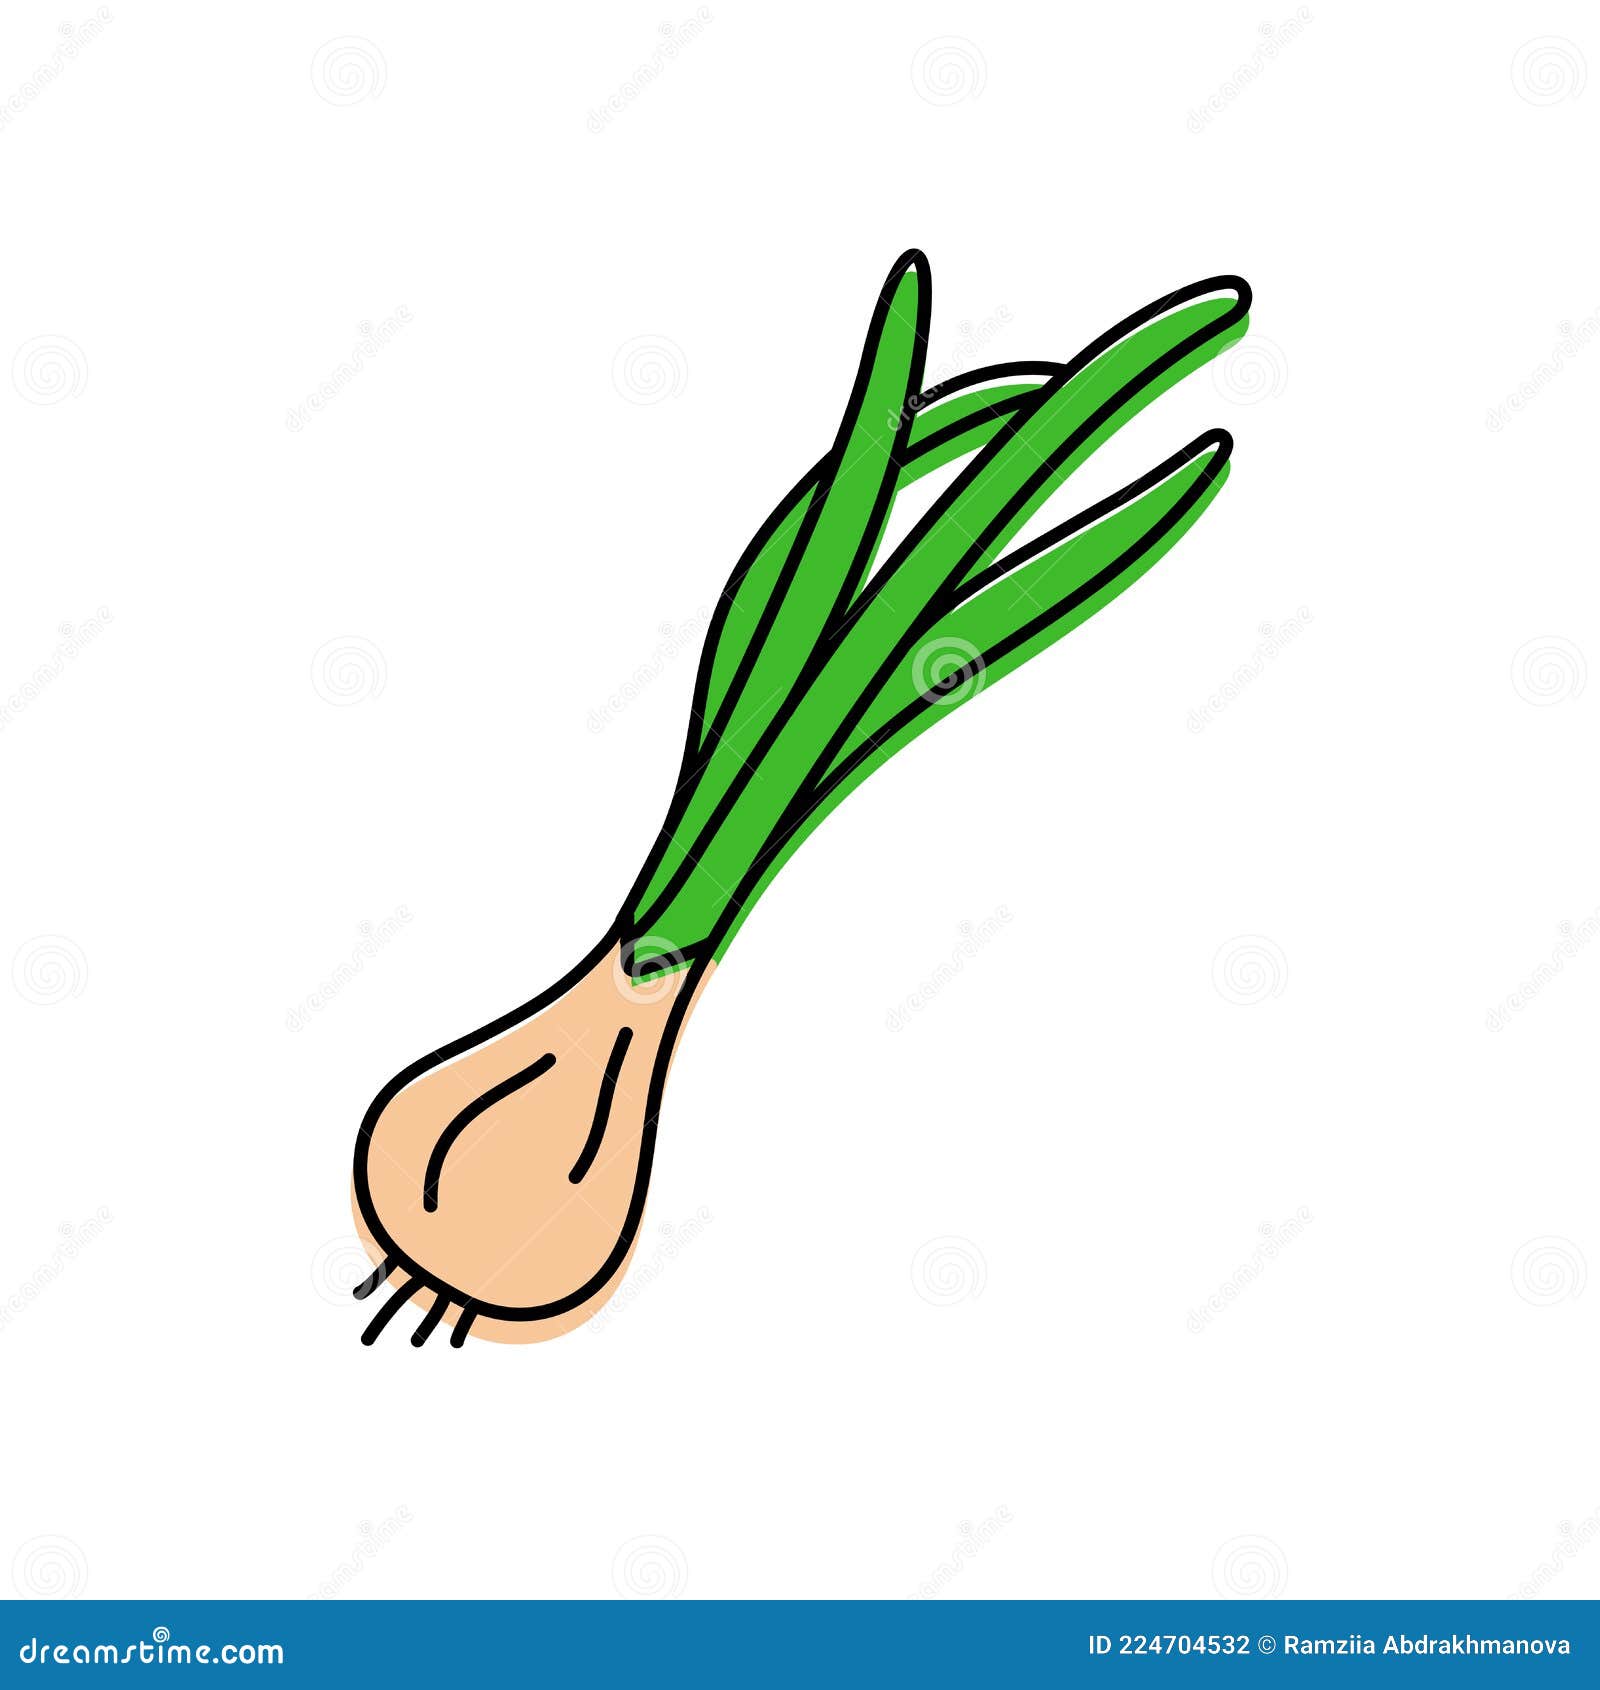 How to Draw Vegetables - Really Easy Drawing Tutorial